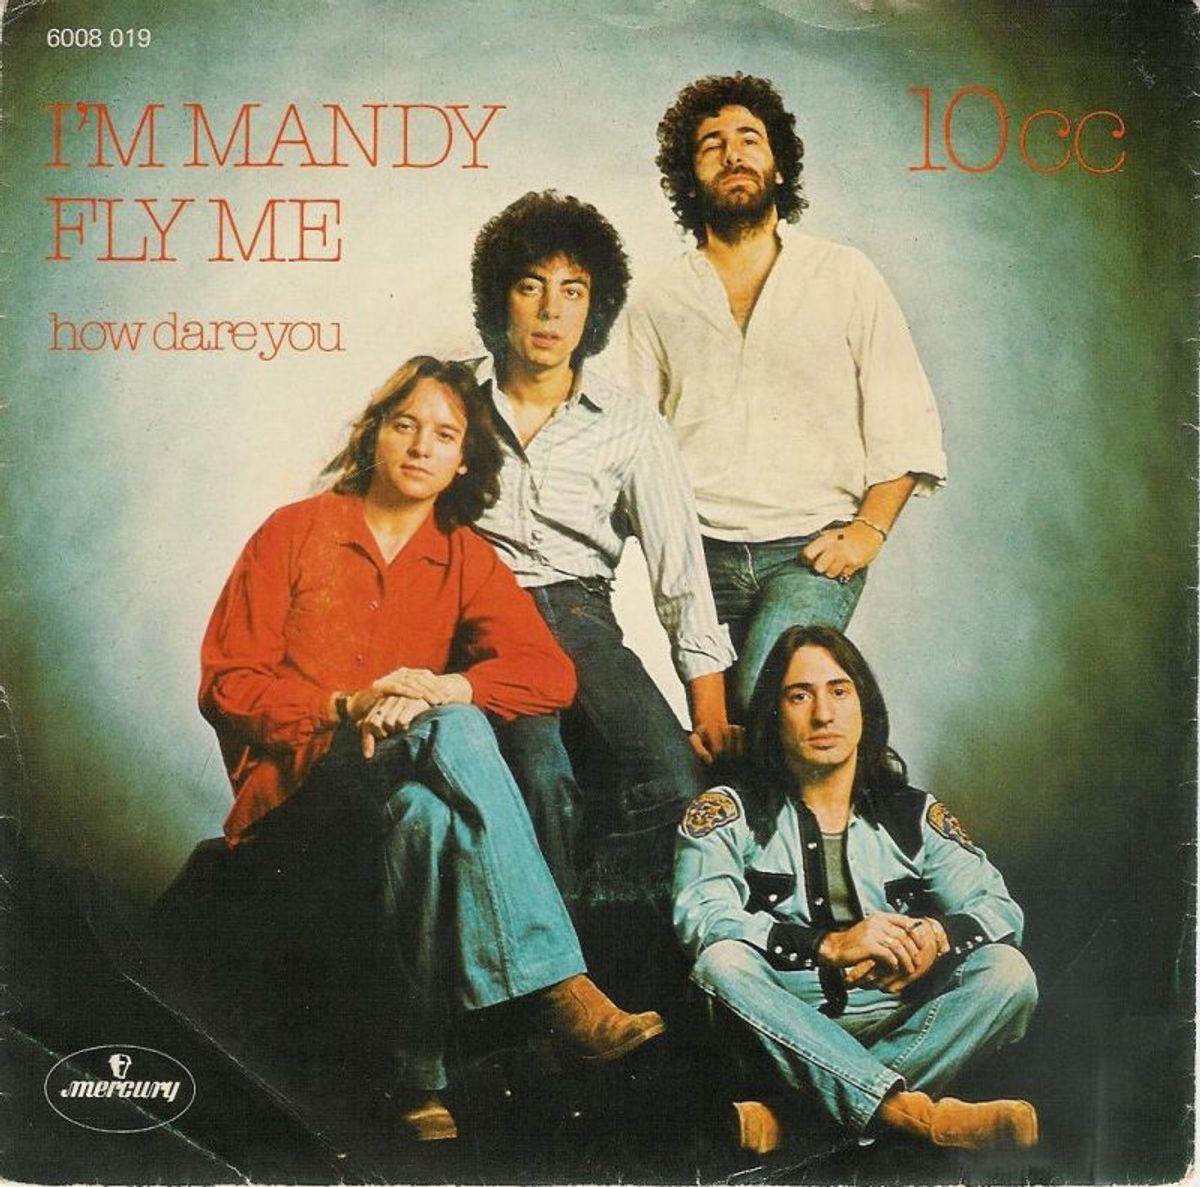 #10ccEtcetera - 10cc - I'm Mandy, Fly Me (1976)